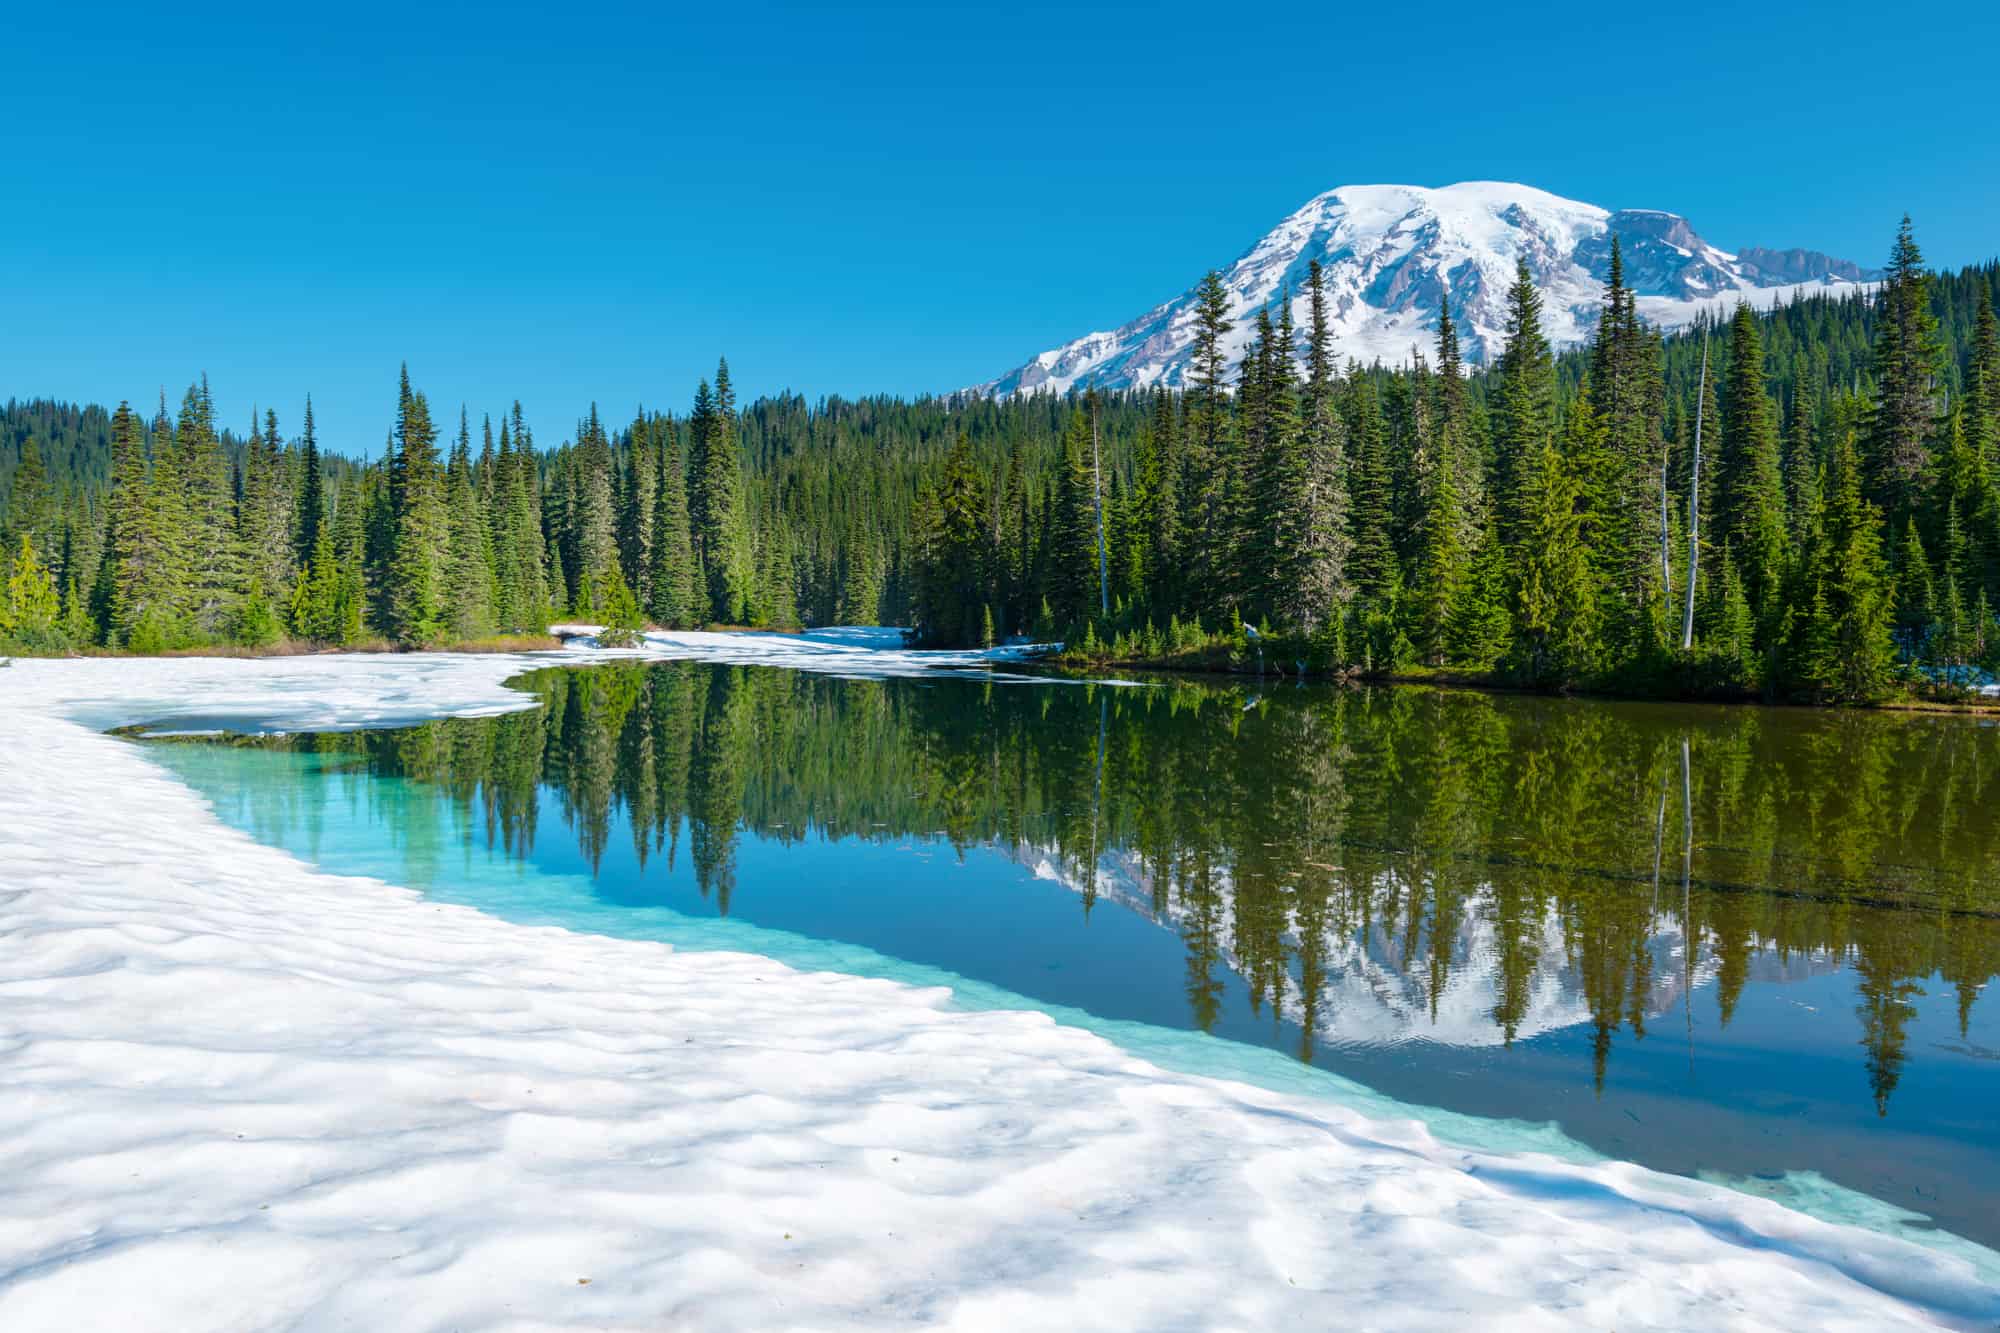 snow sits along the shore at reflection lake with trees and mount rainier in the background, mount rainier in winter will give you gorgeous clear days like this as well as terrible snowy weather
